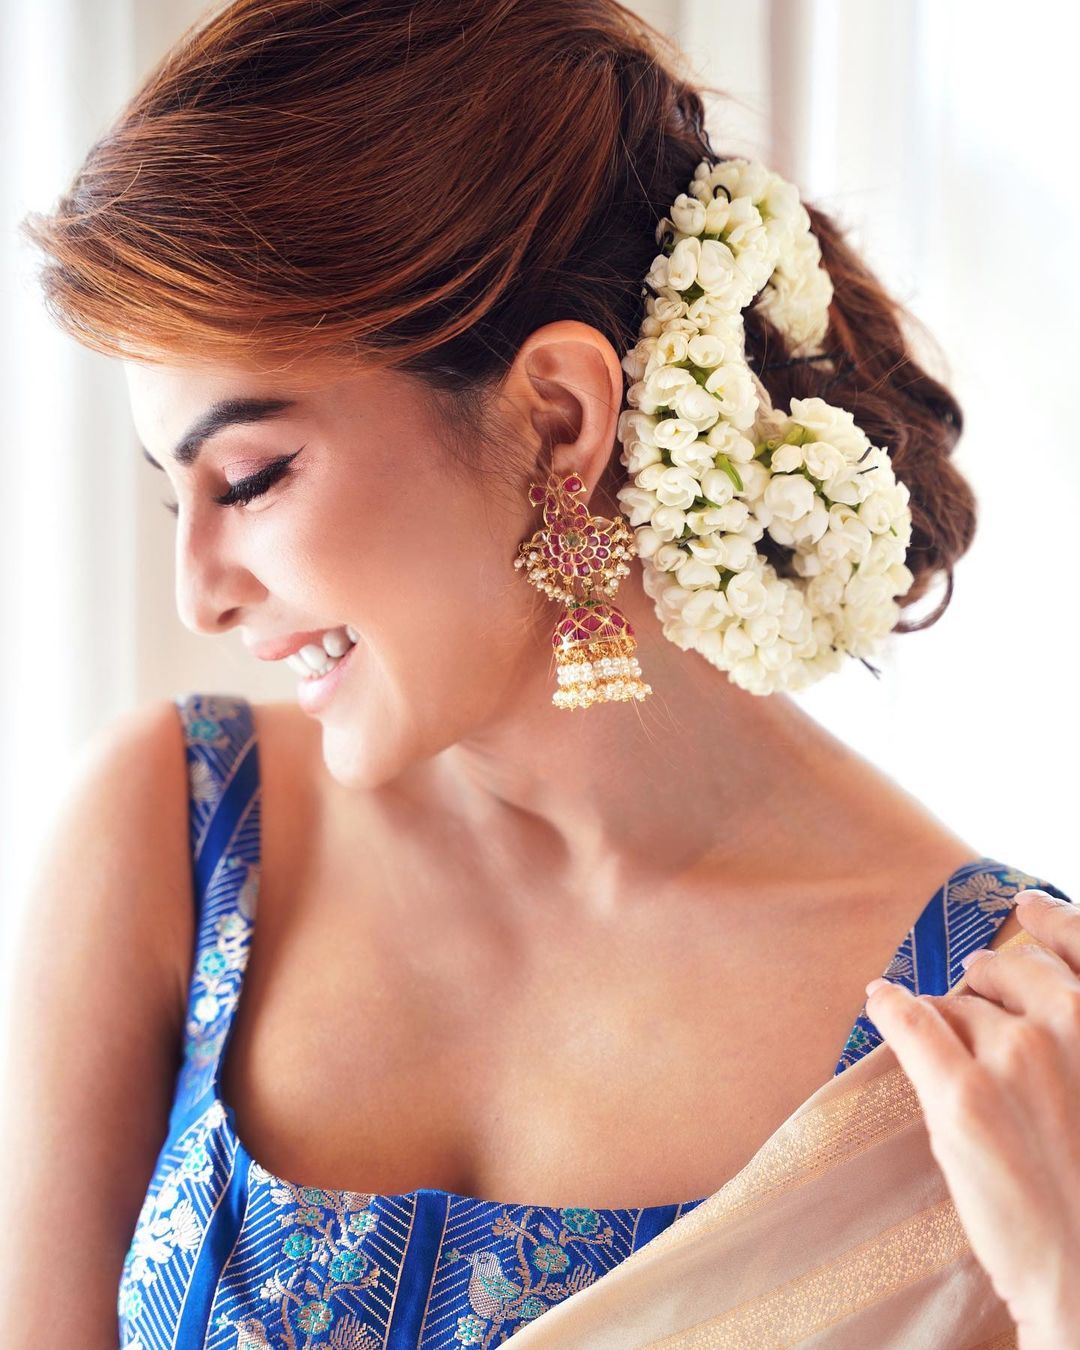 Jacqueline Fernandez stuns with the fresh flowers adorning her hair and traditional jhumkas.